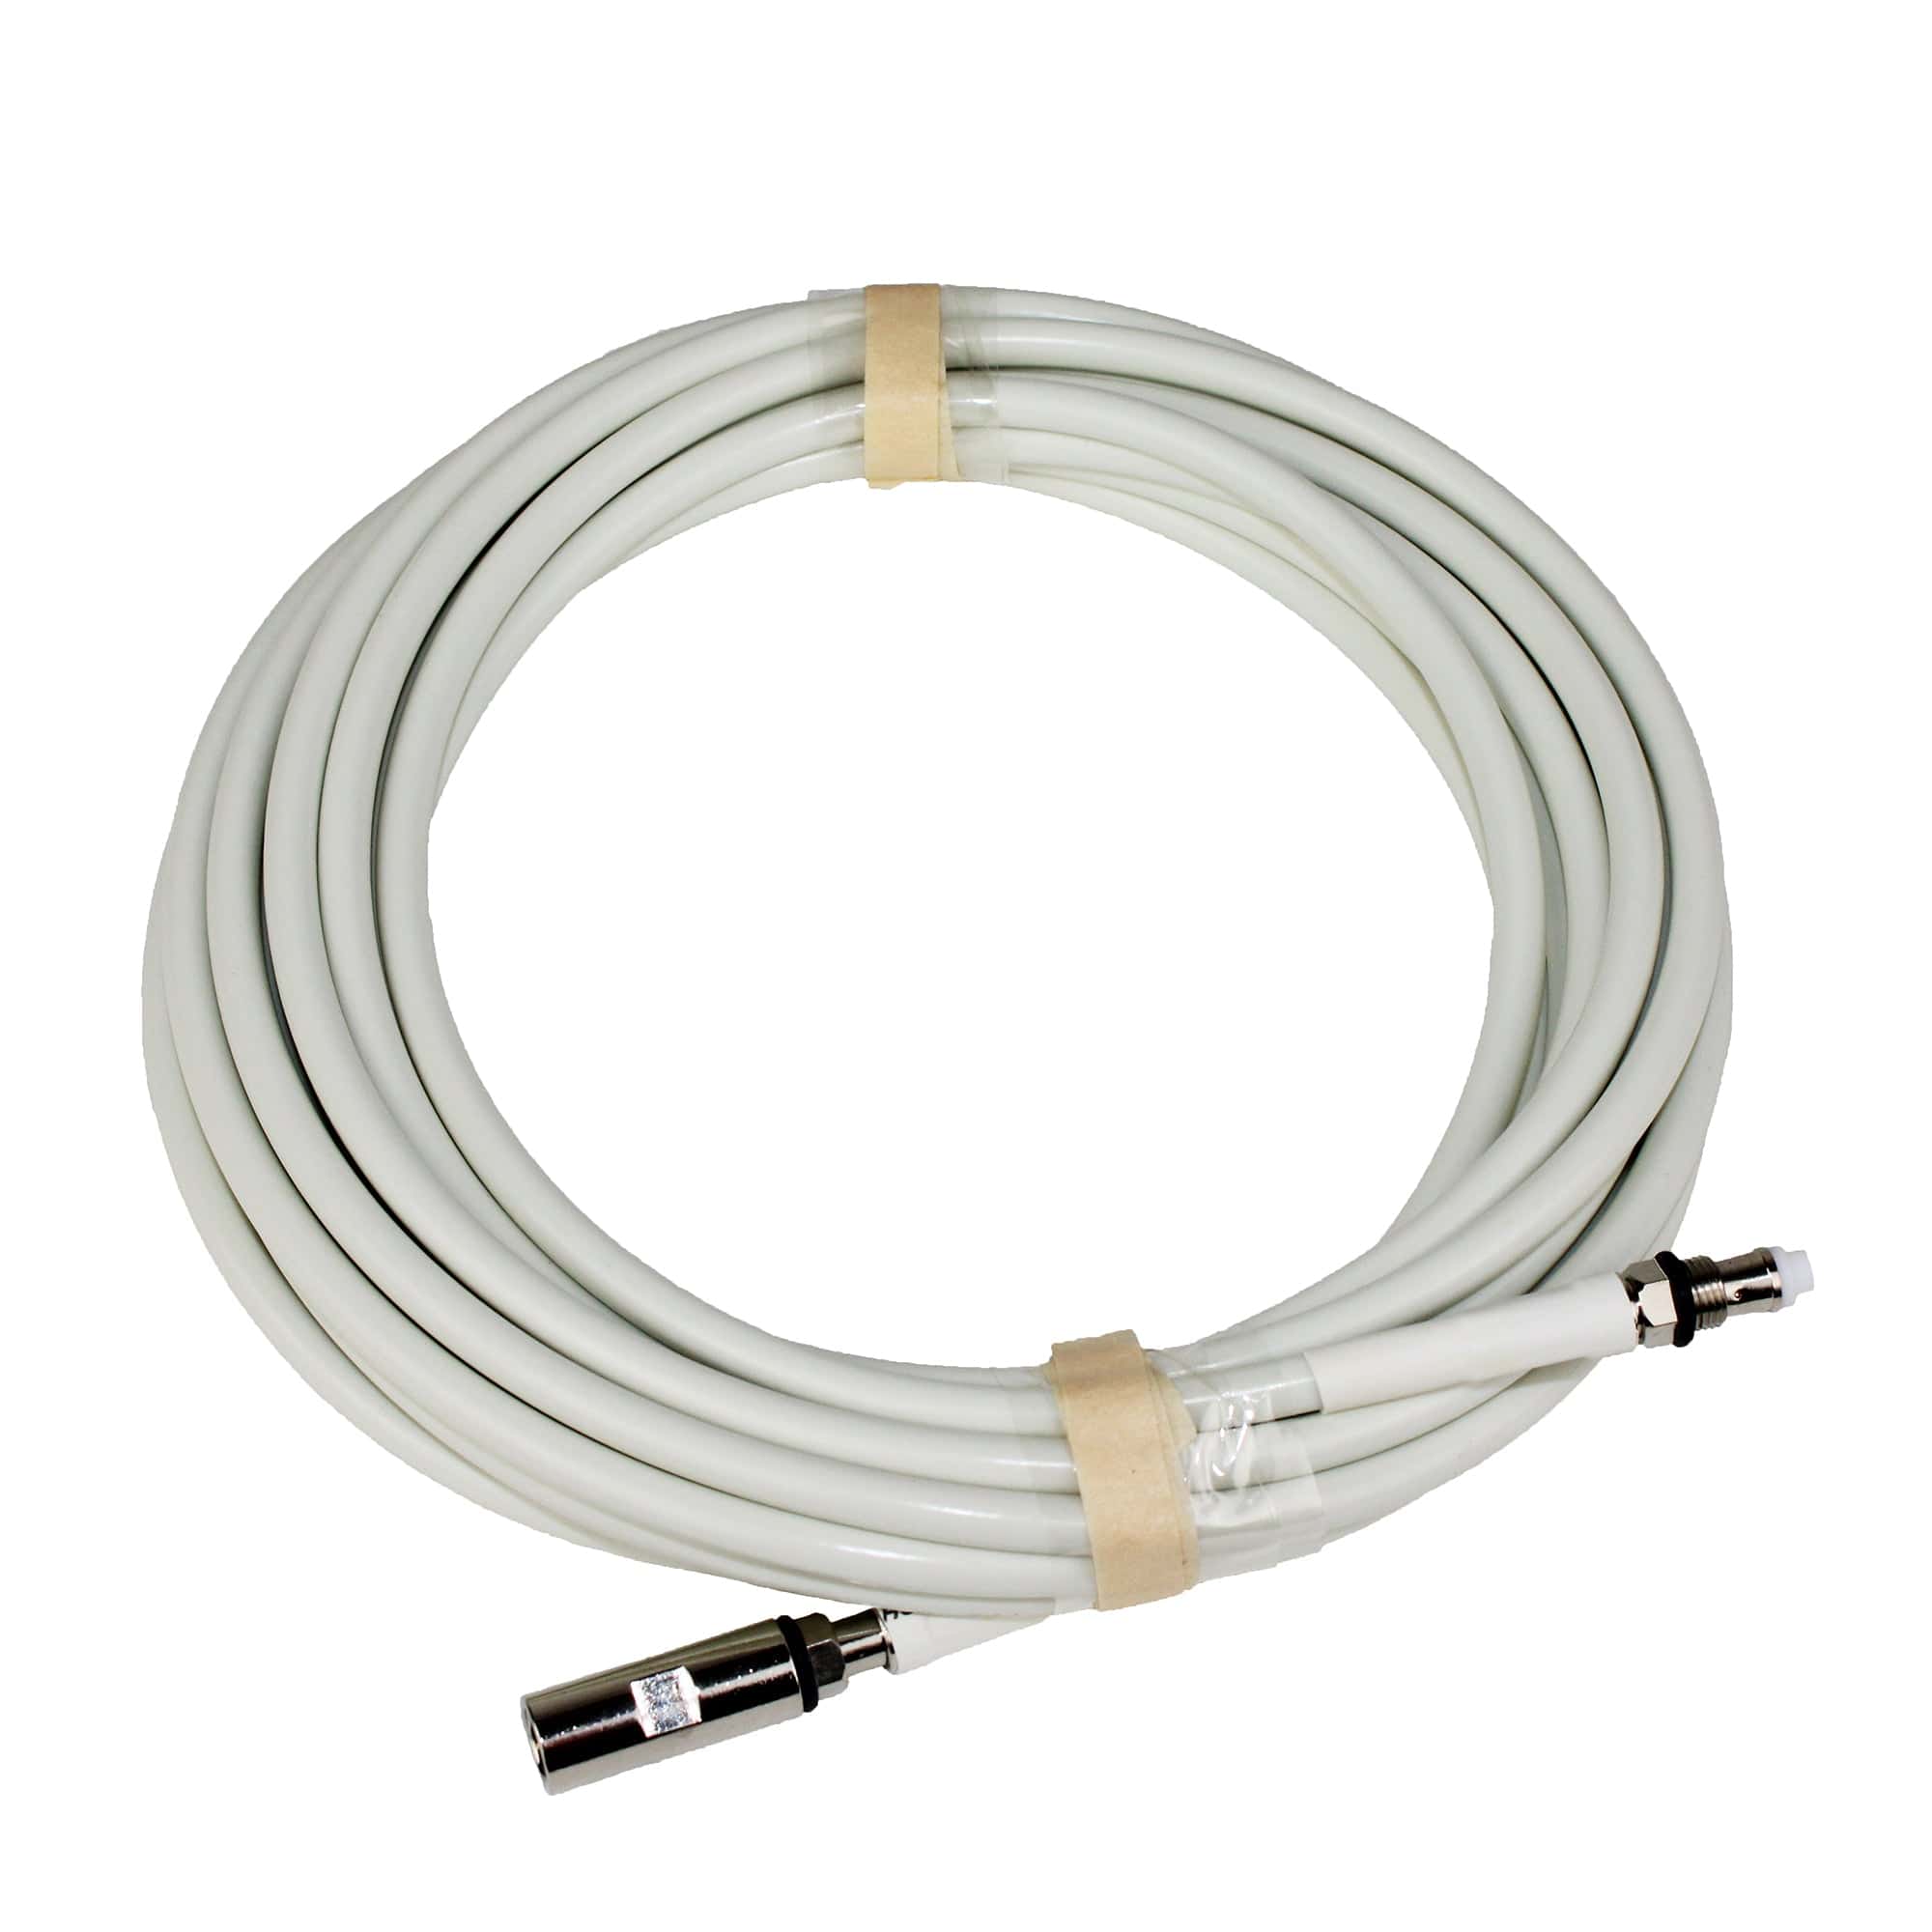 Shakespeare 4078-20-ER 20' RG-8X FME Antenna Extension Cable Kit for VHF/AIS/CB